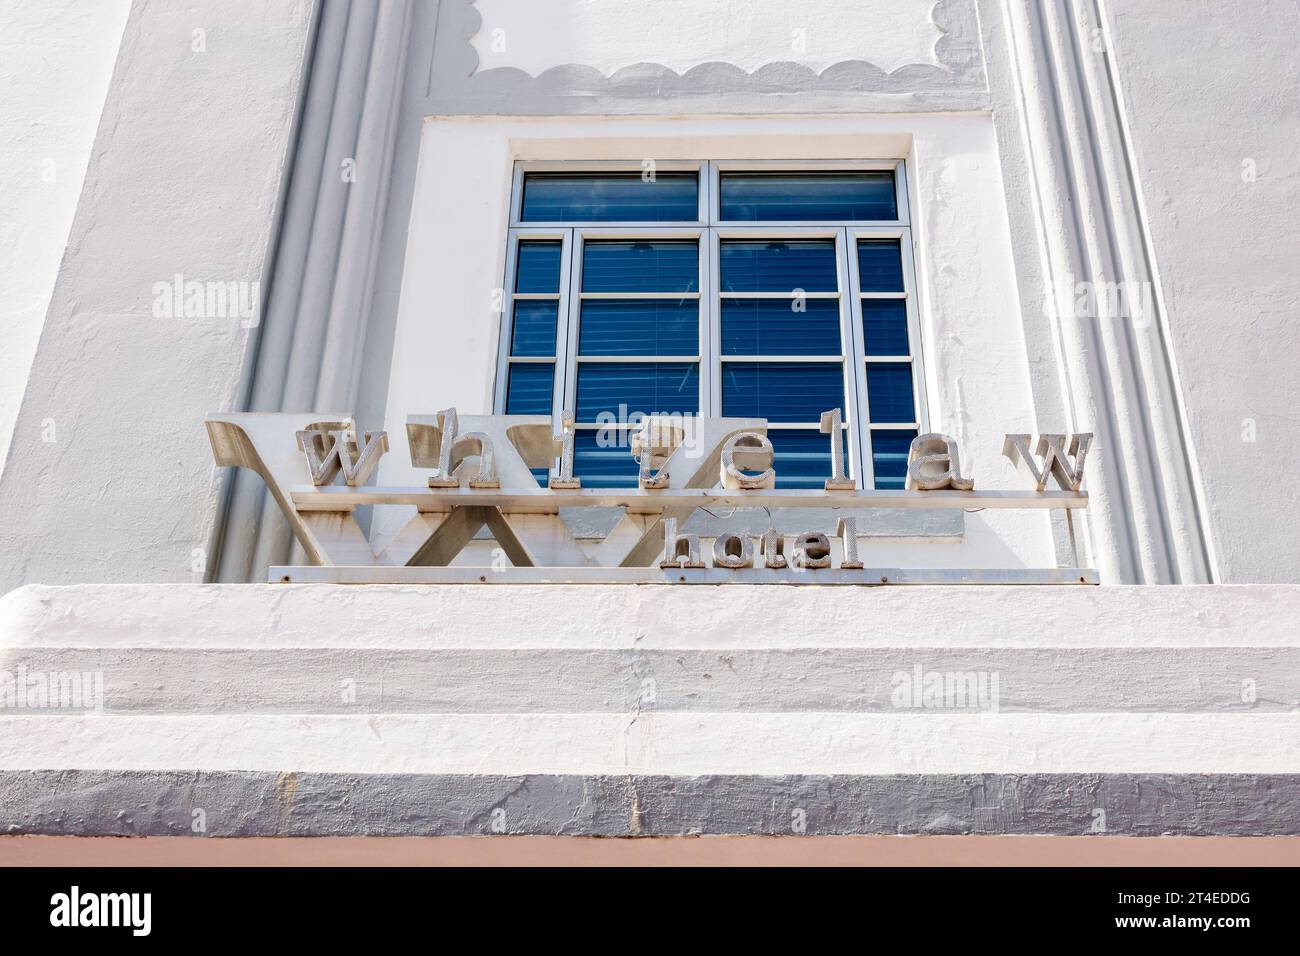 Miami Beach Florida,outside exterior,building front entrance hotel,Collins Avenue,Whitelaw Hotel sign,hotels motels businesses Stock Photo